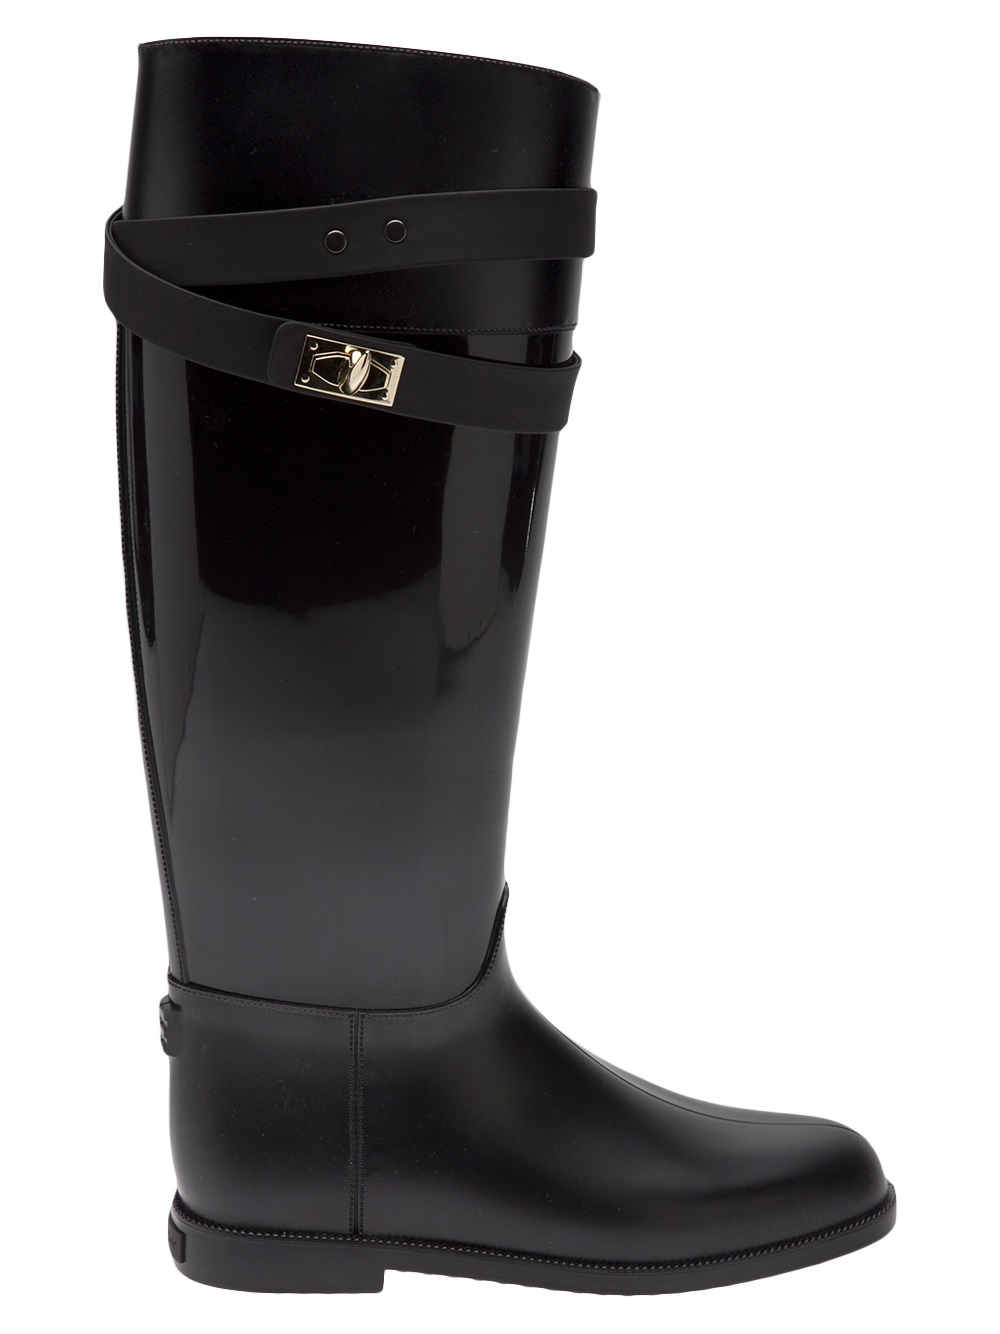 Givenchy Riding Boot in Black - Lyst